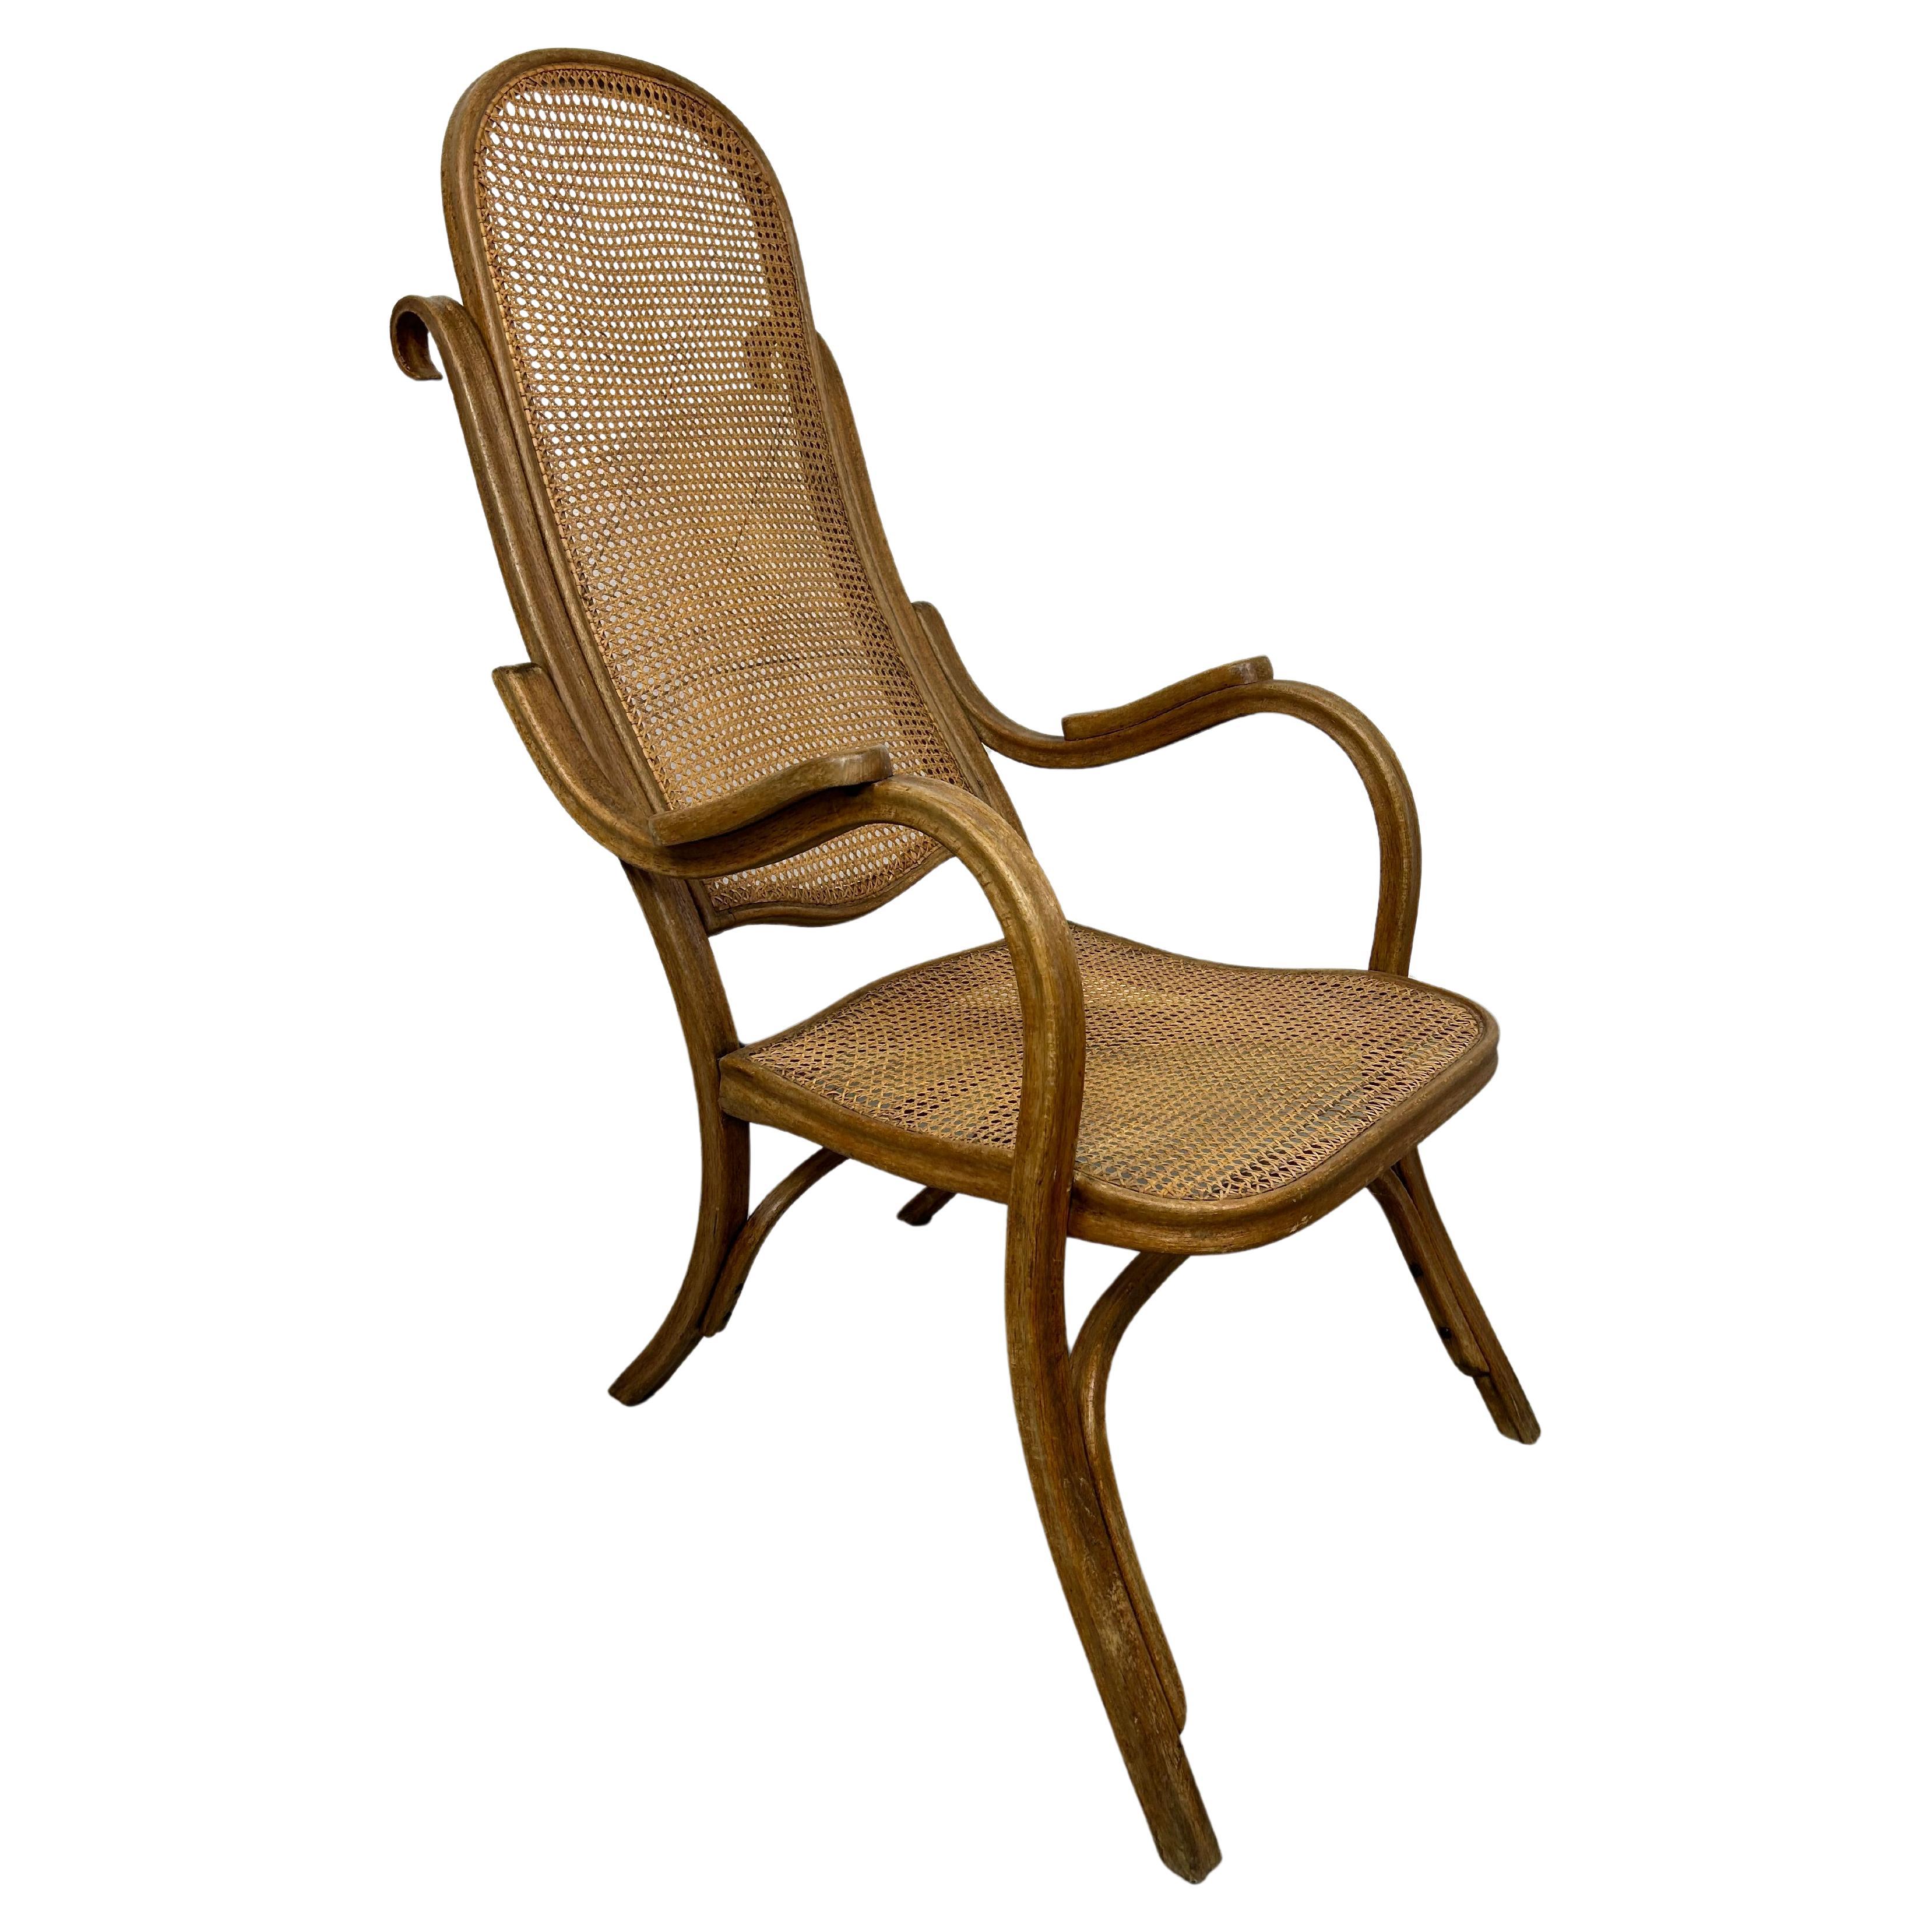 Easy armchair no.1 with rattan seat by Thonet For Sale